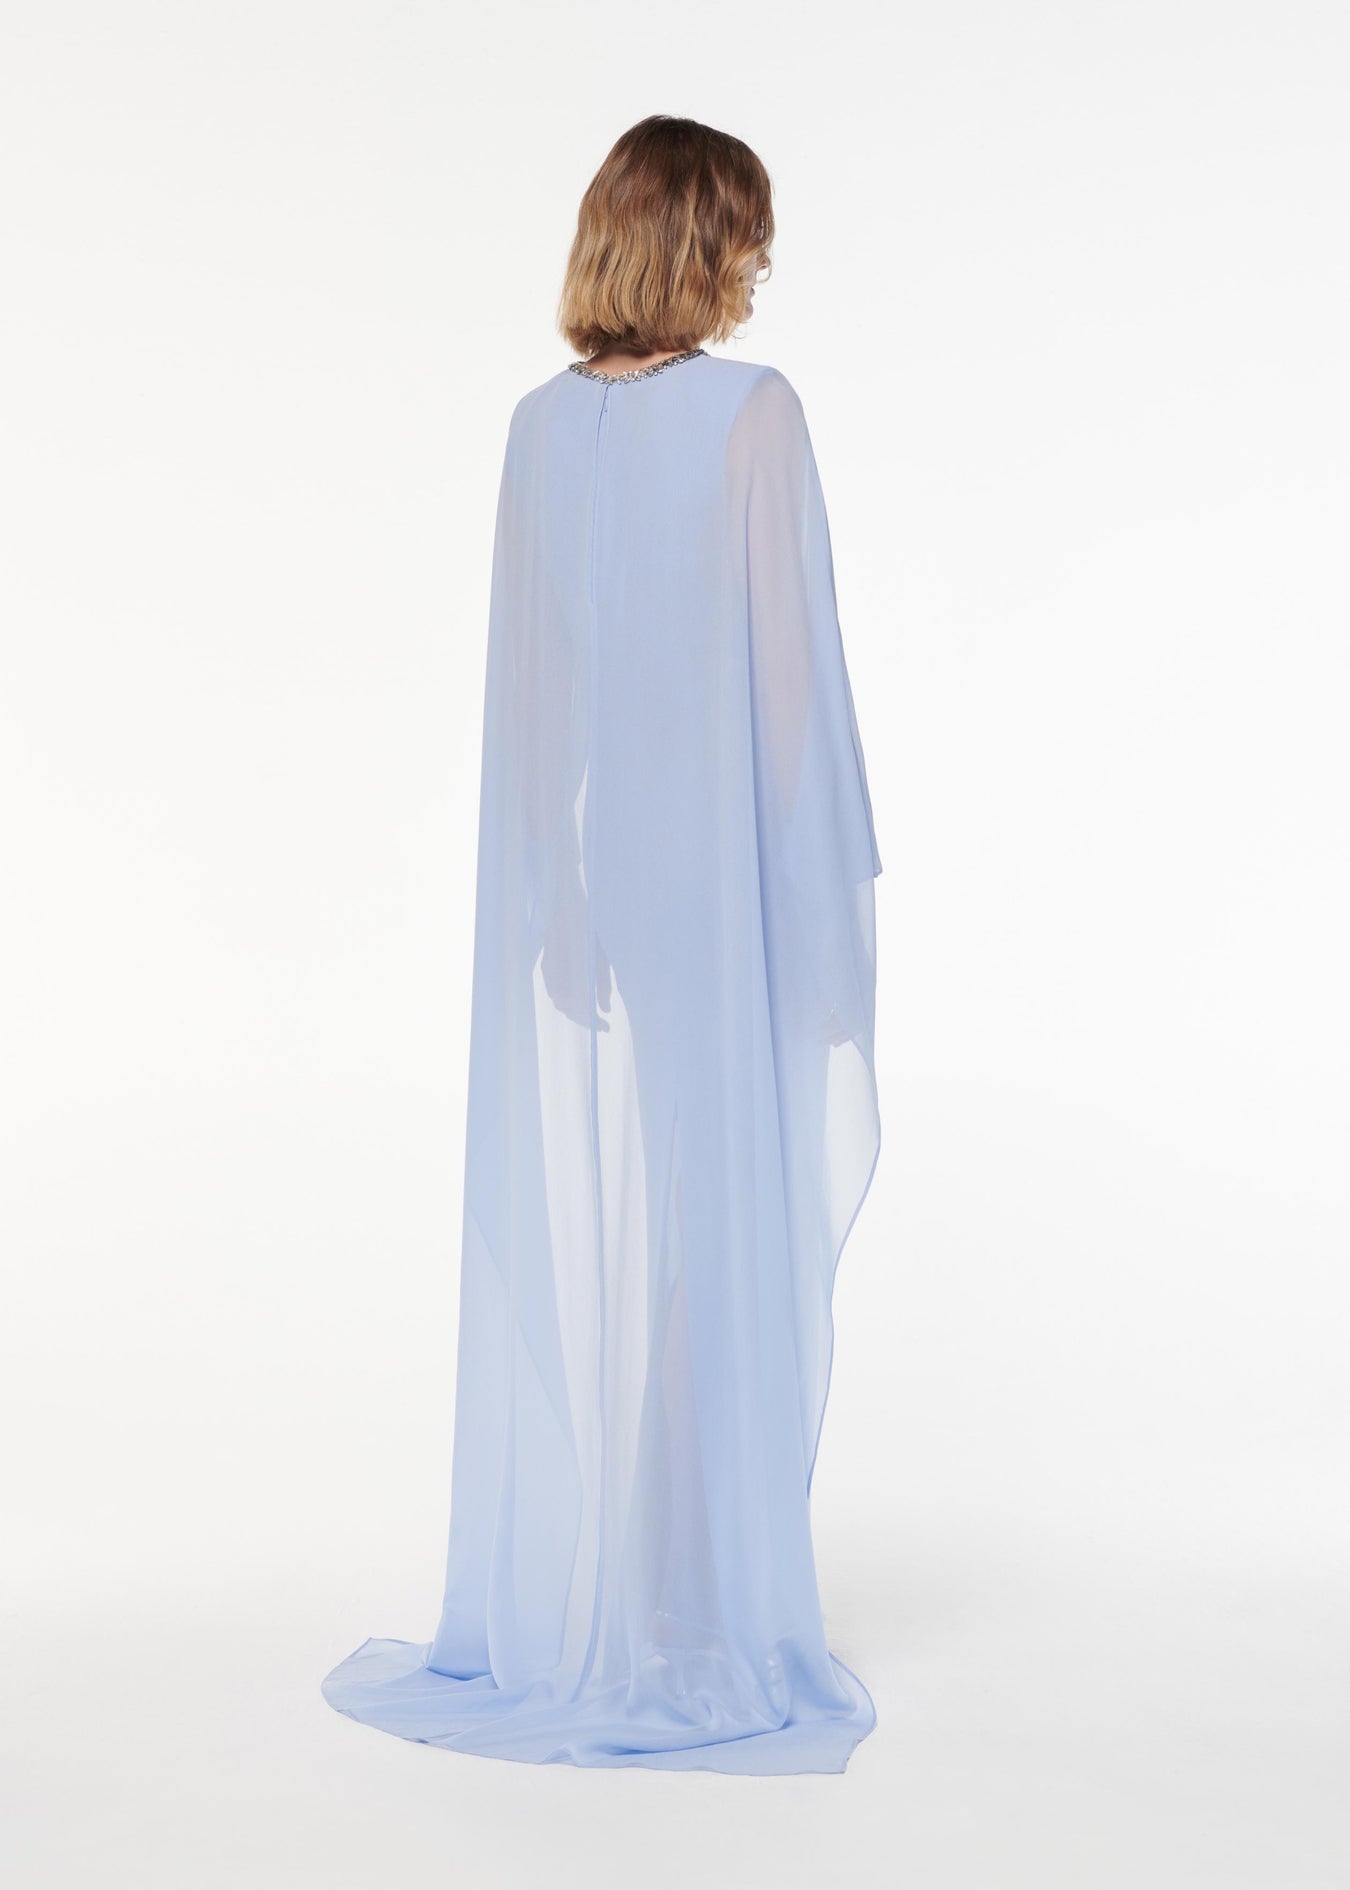 A photograph of a woman wearing a Silk Chiffon Diamante Gown in Blue